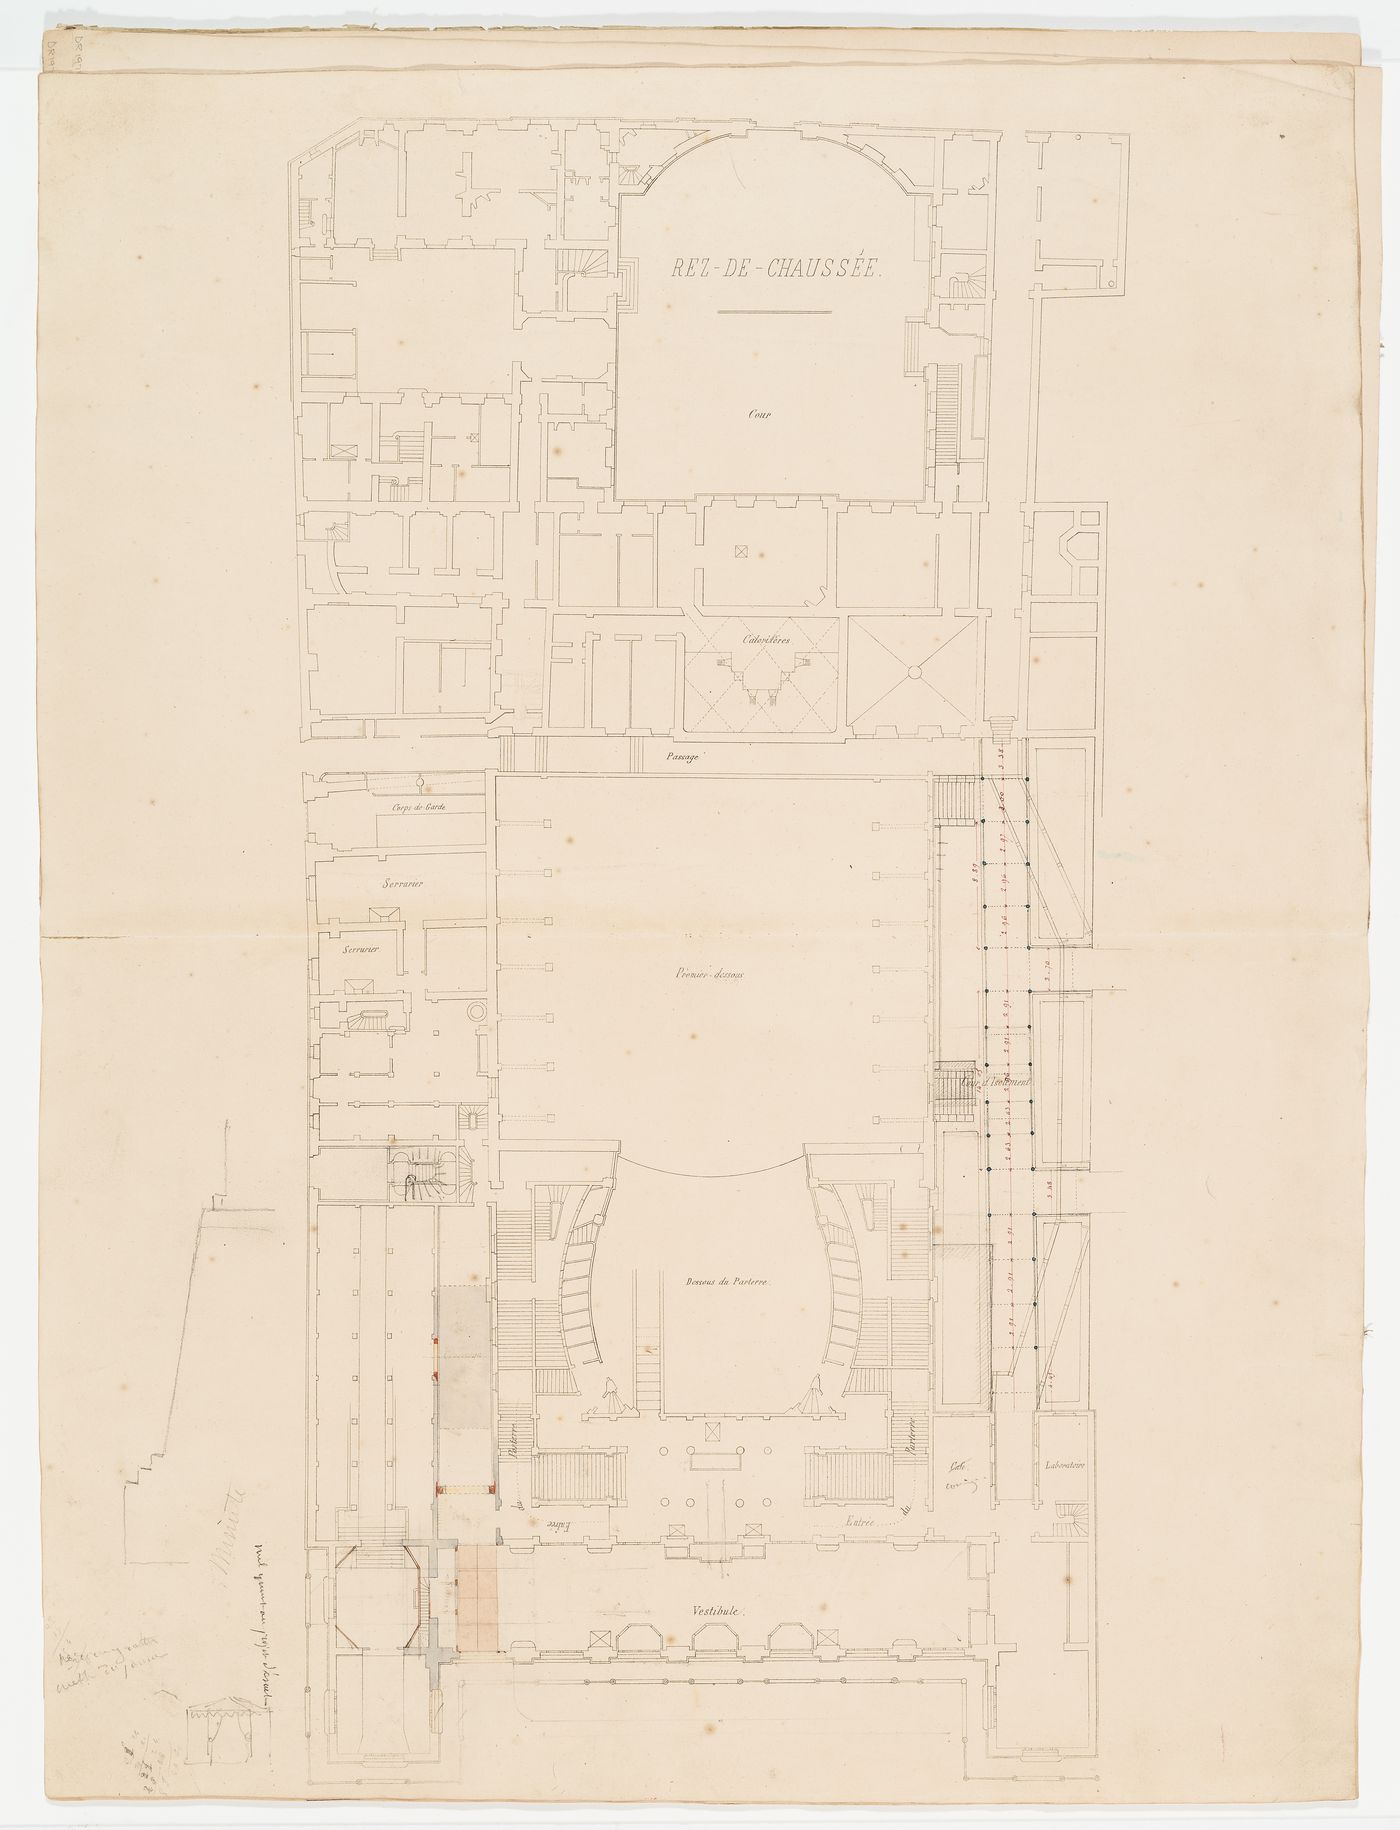 Ground floor plan of Salle Le Peletier with additions for alterations to the "passage"